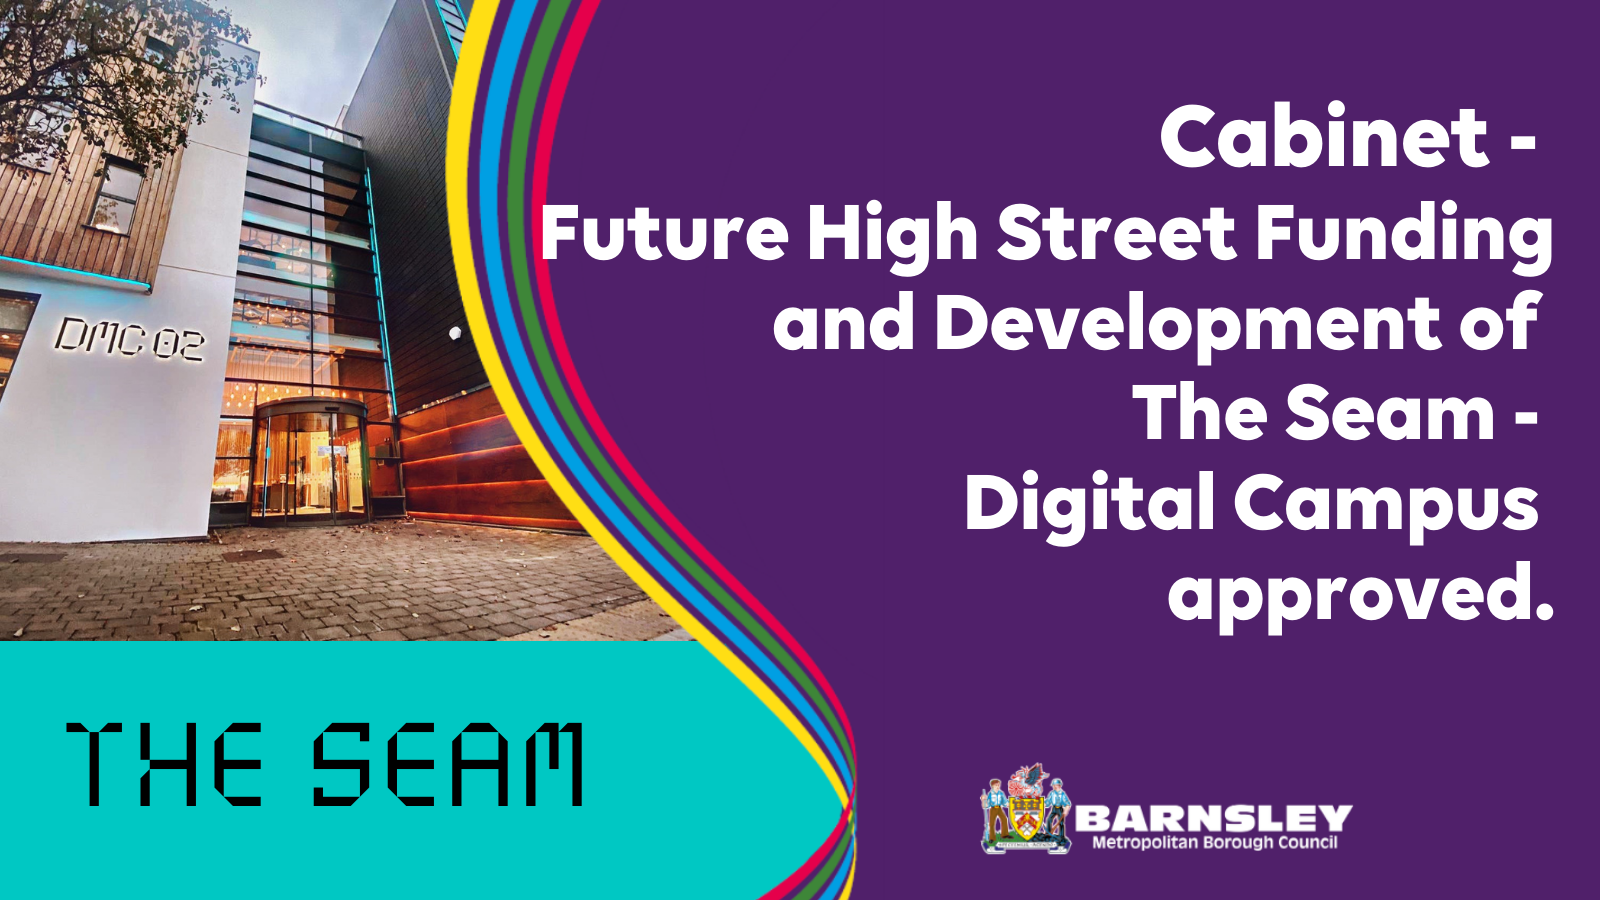 Cabinet - Future High Street Funding and Development of The Seam - Digital Campus approved